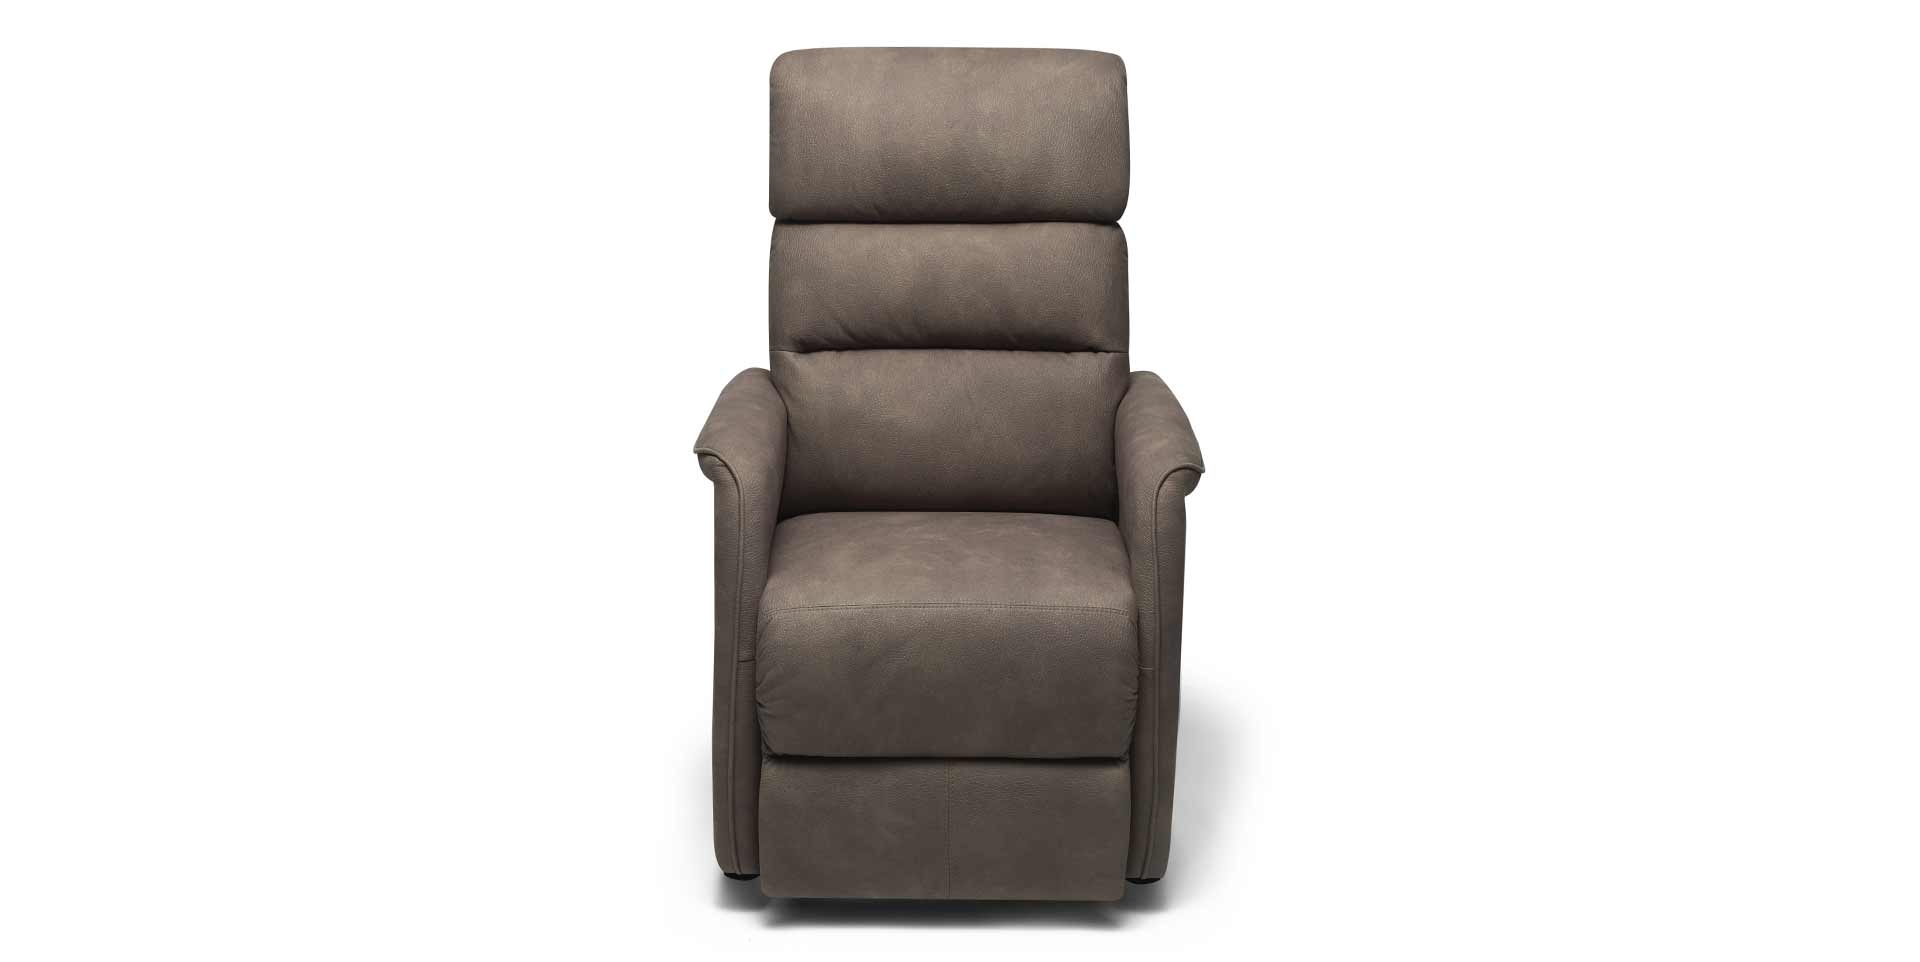 Slider Fauteuil relaxation SOFT (image 4)